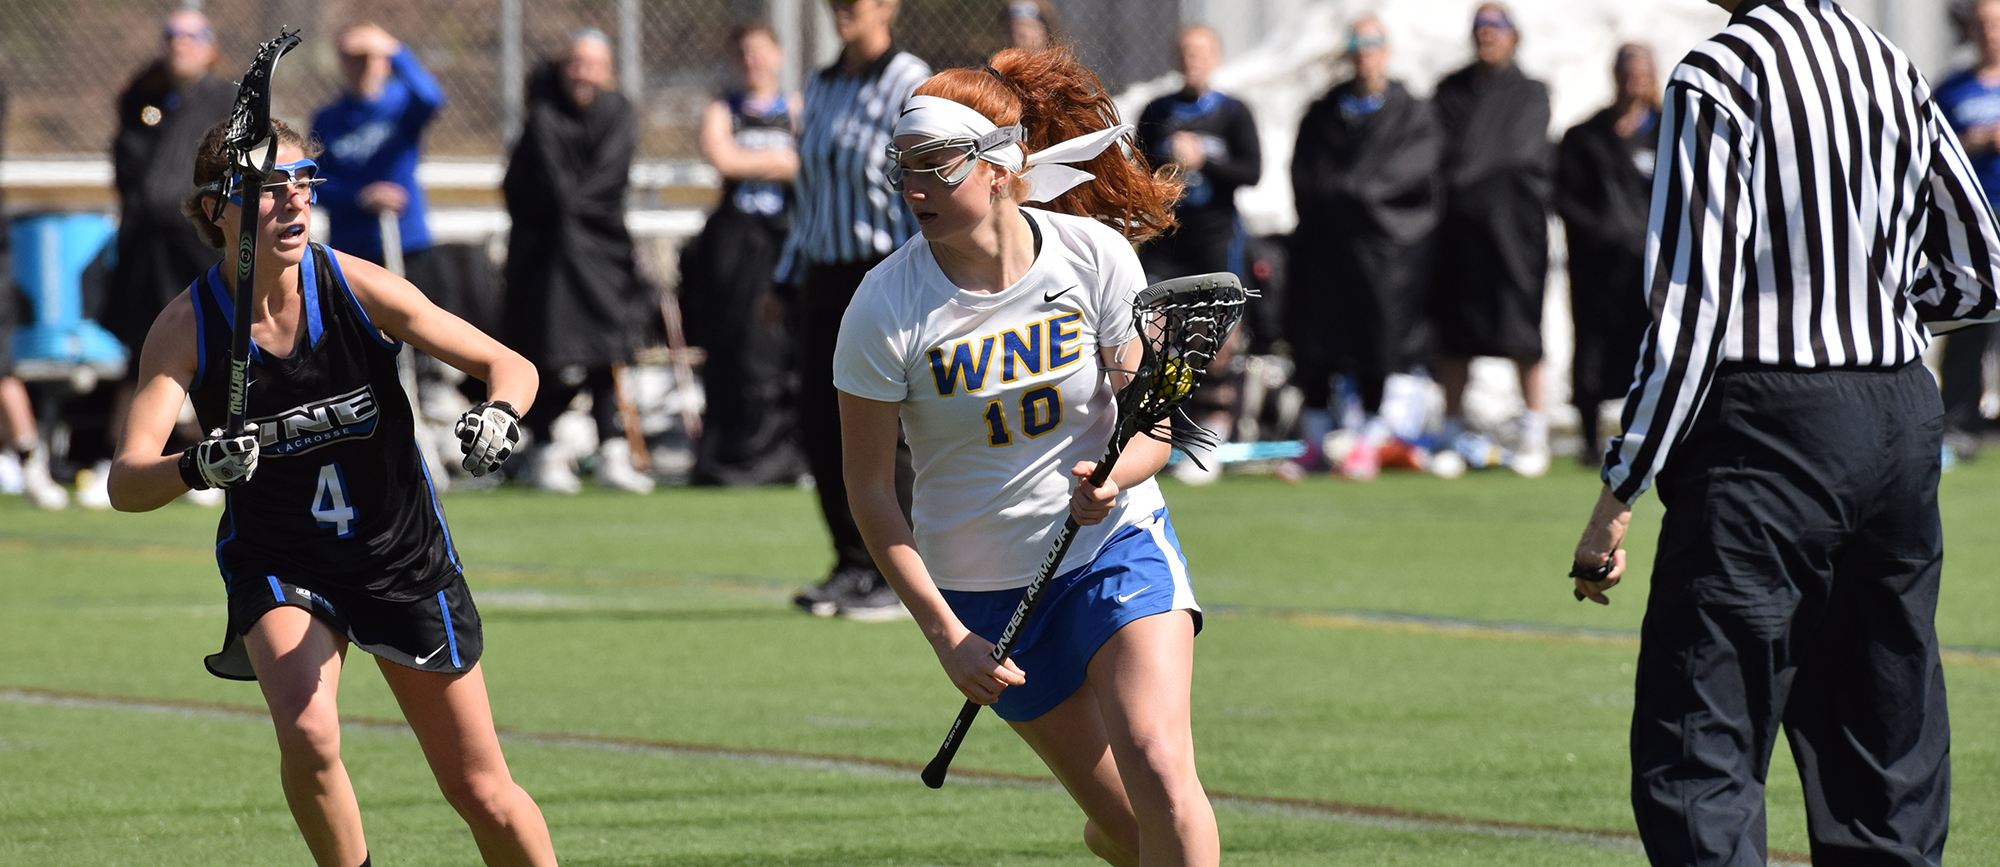 Fast Start, Strong Finish Help Golden Bears Register 11-7 Win at Curry